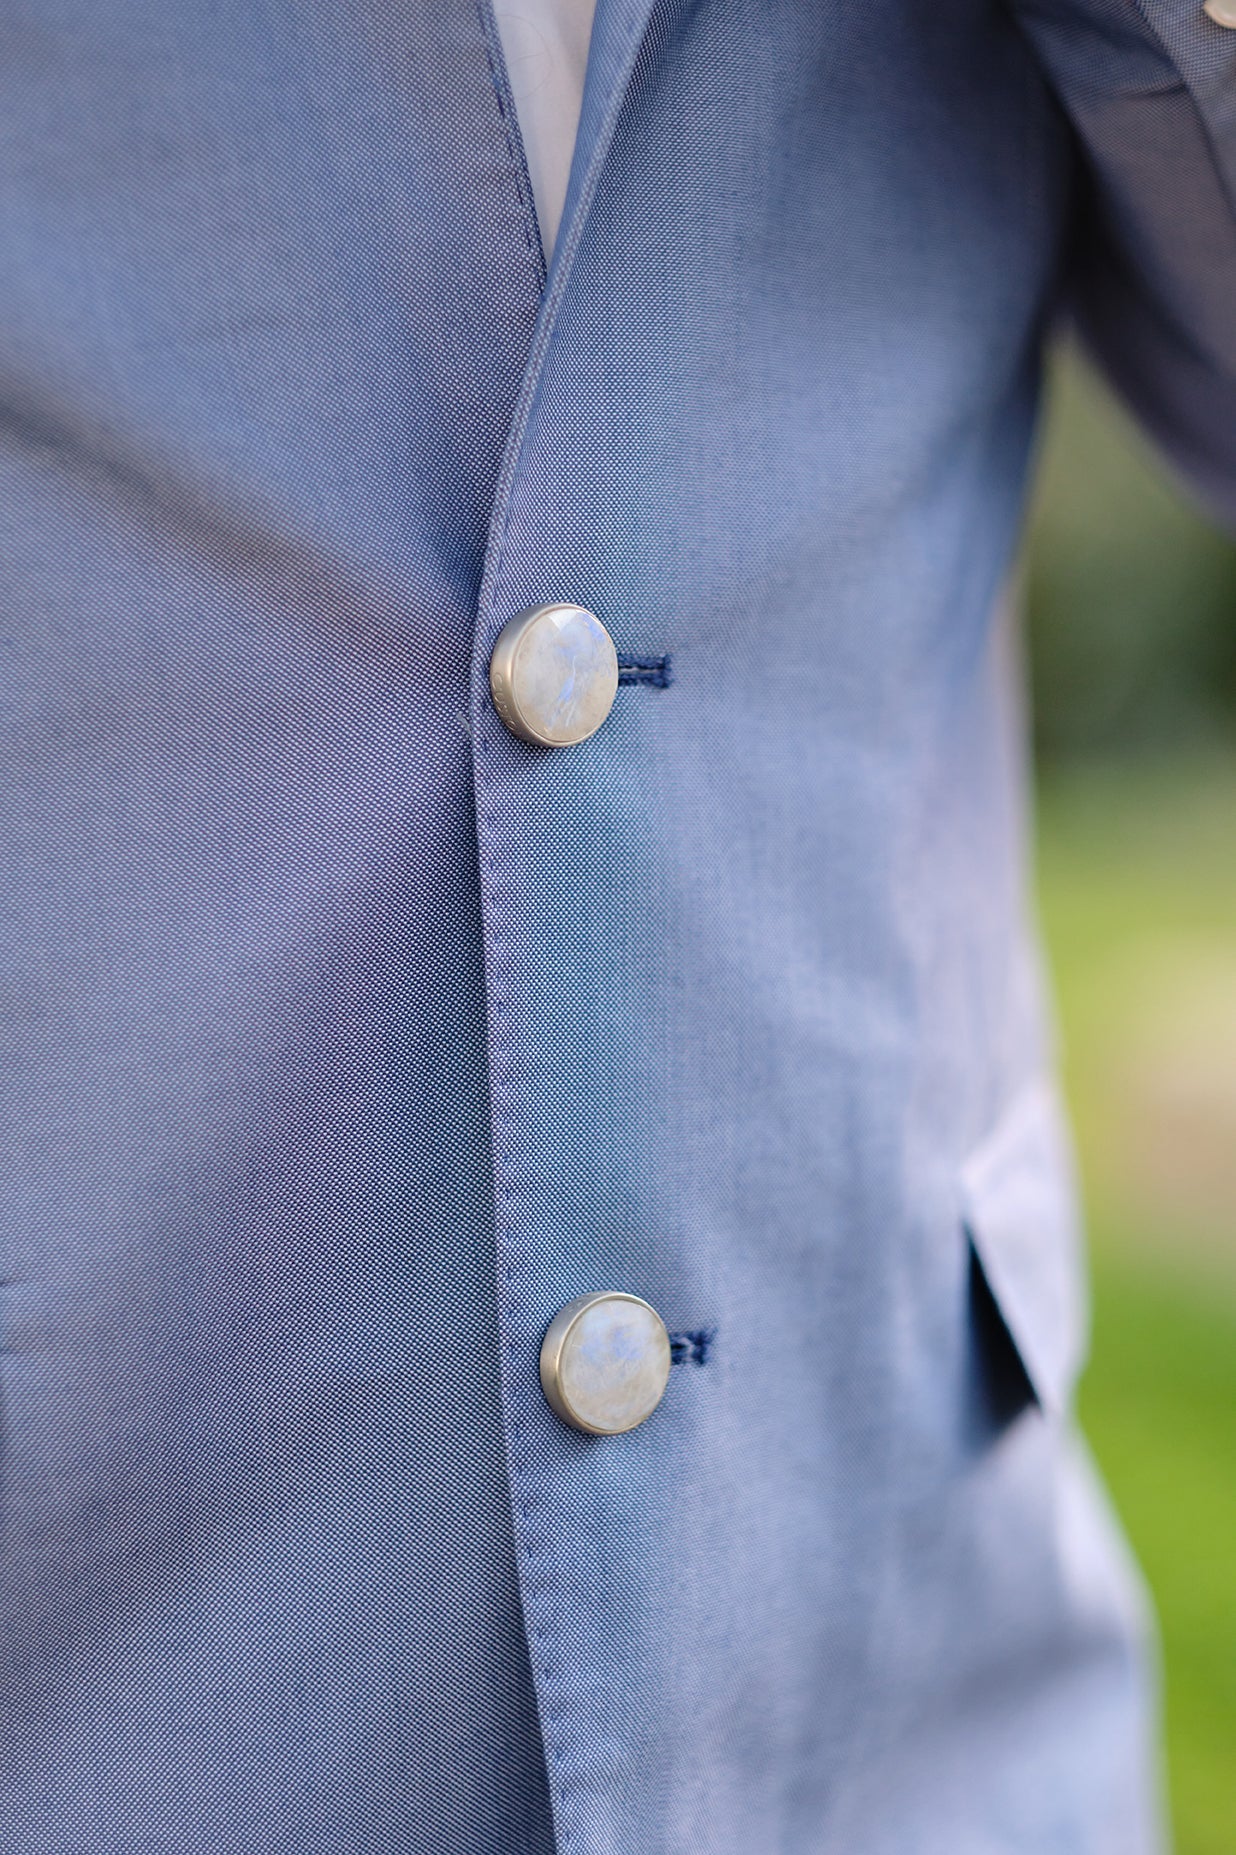 21mm button in brushed silver metal and faceted moonstone